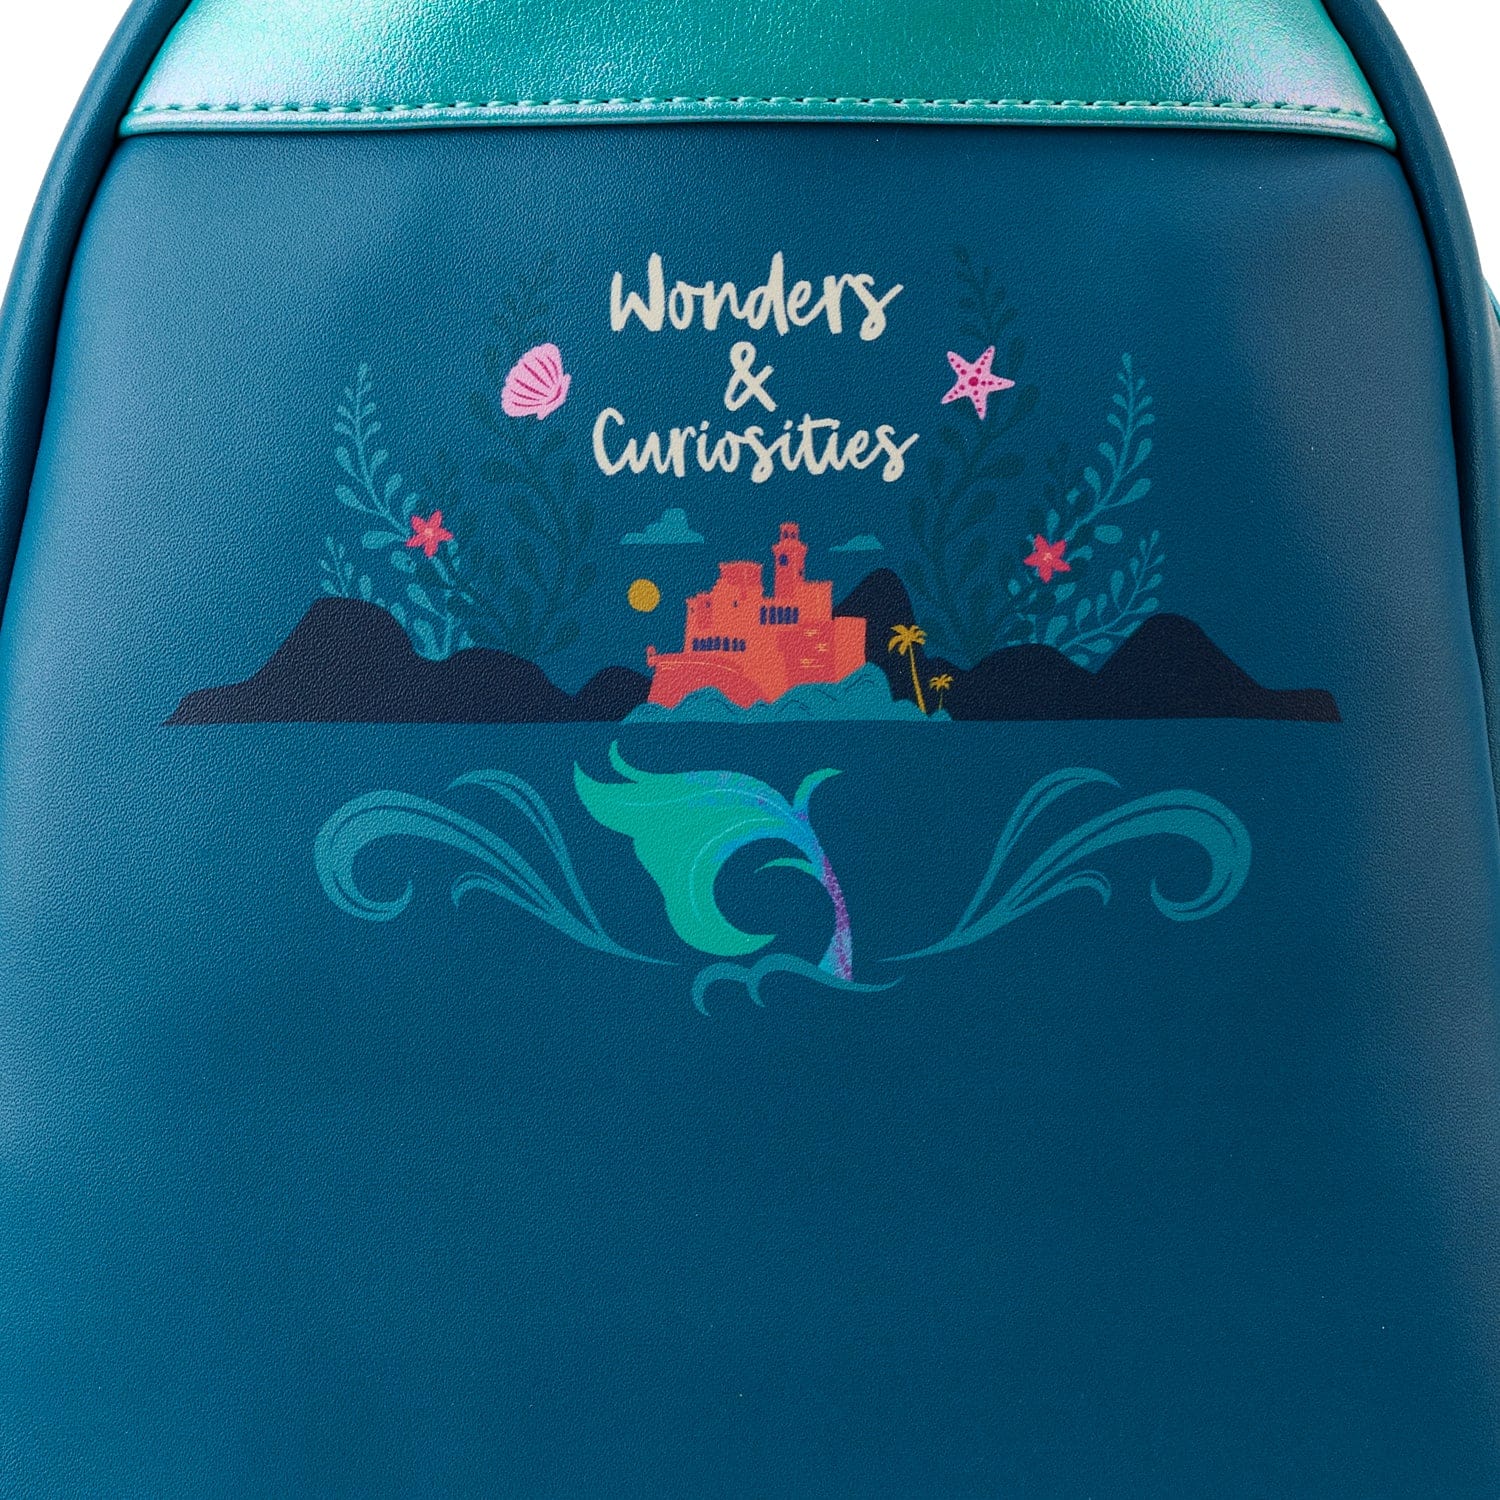 Loungefly Loungefly Disney The Little Mermaid Ariel Live Action Mini Backpack Kawaii Gifts 671803455399